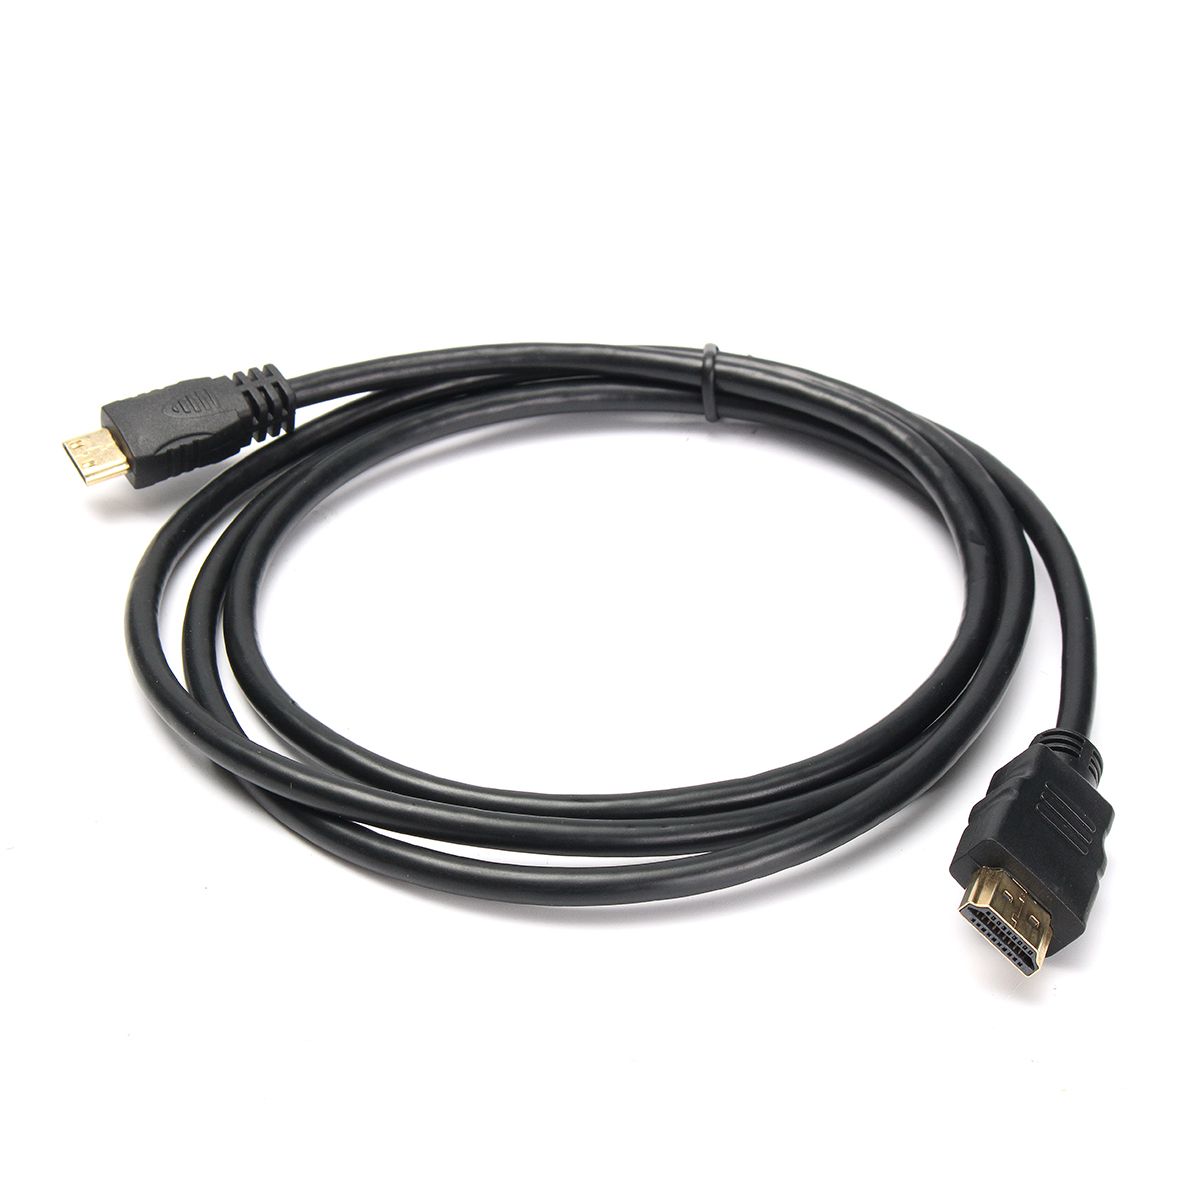 18m-6FT-Mini-Micro-HD-to-HD-Male-Adapter-Converter-Cable-for-HDTV-1080P-1126838